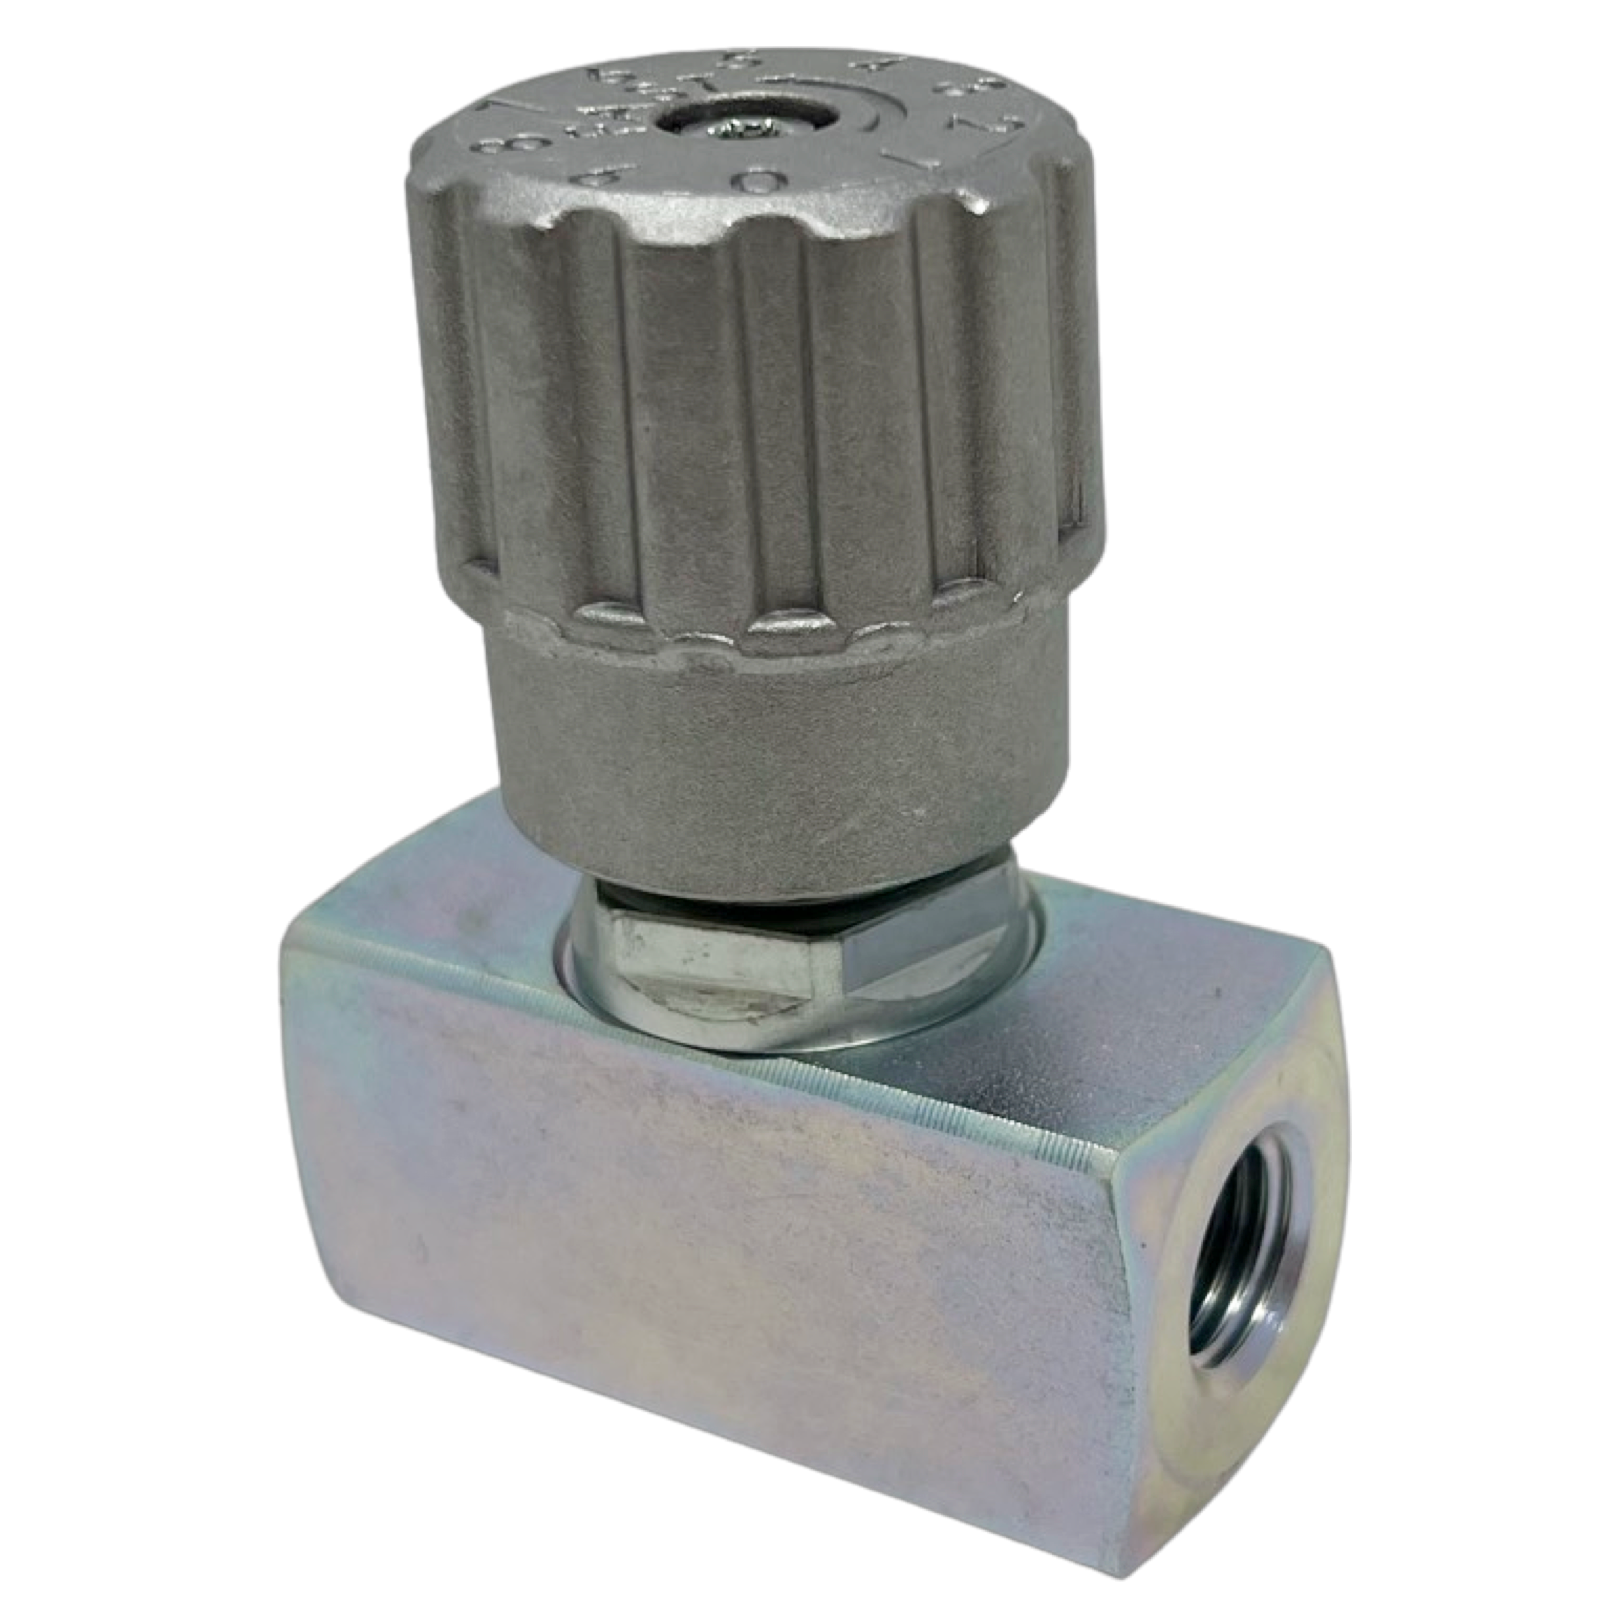 NN1-1/4-1 : AFP Needle Valve, 1.25" NPT, 4000psi and 50GPM Flow Rated, Steel